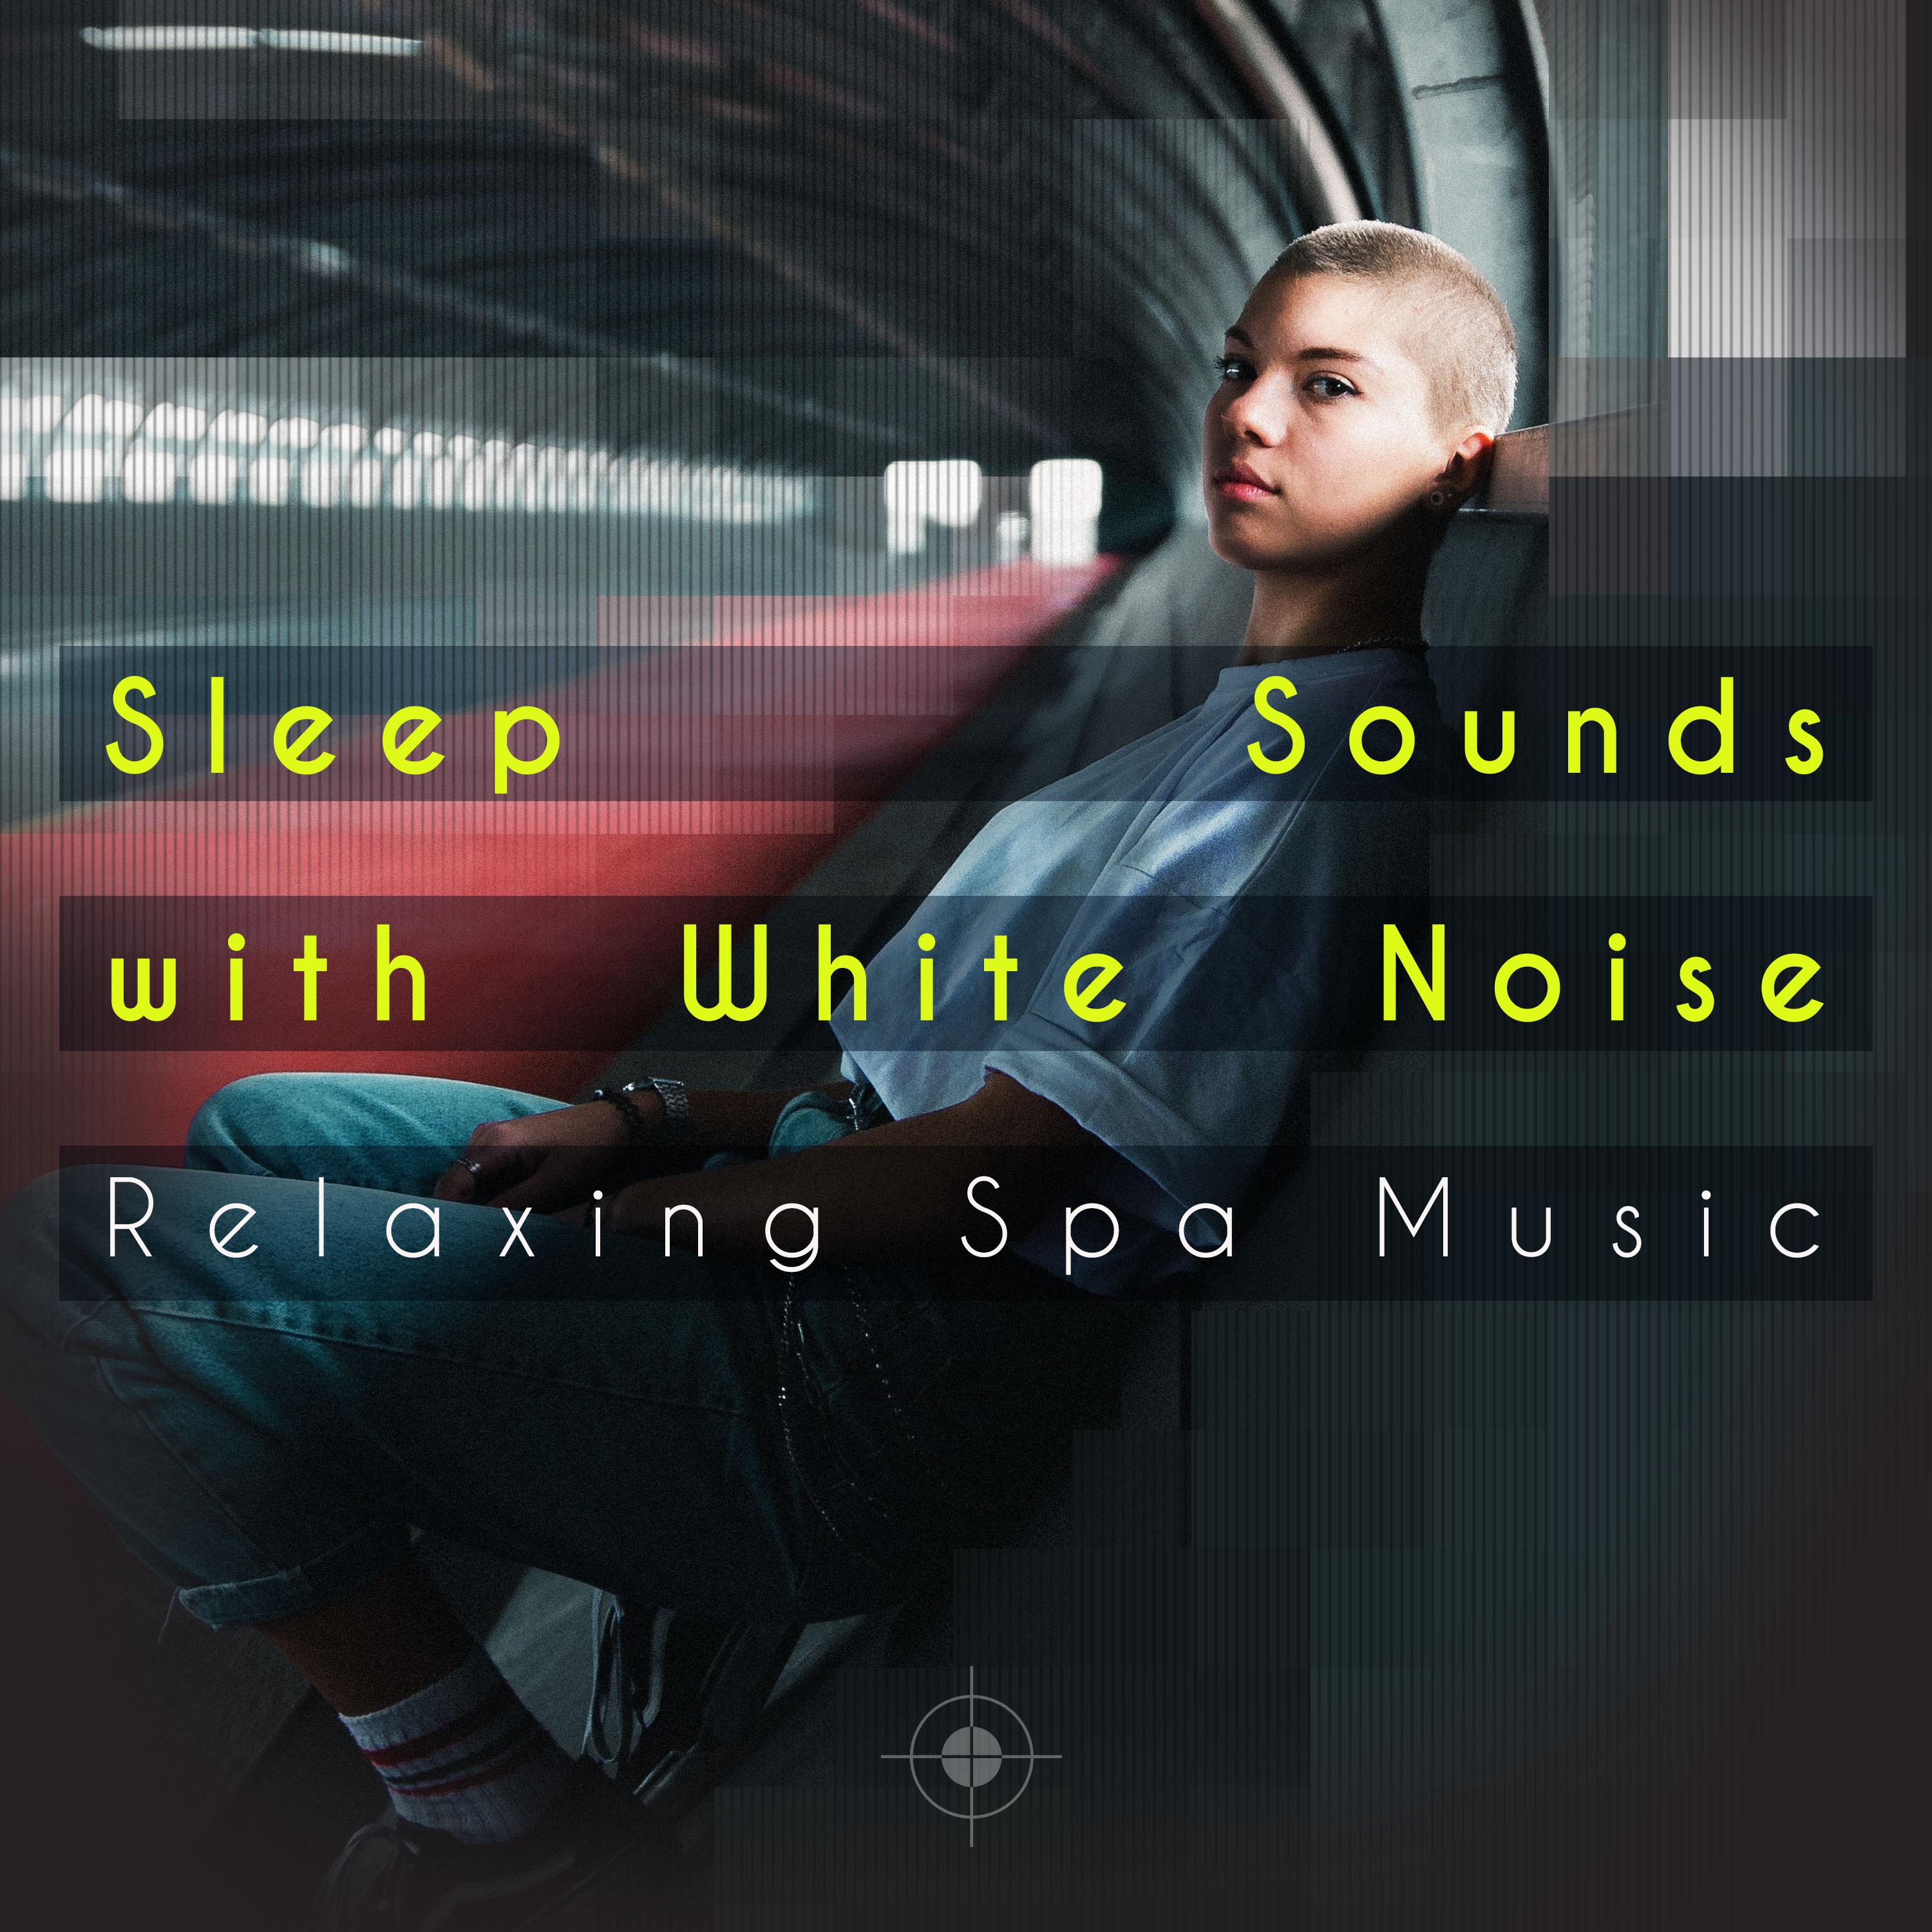 Sleep Sounds with White Noise